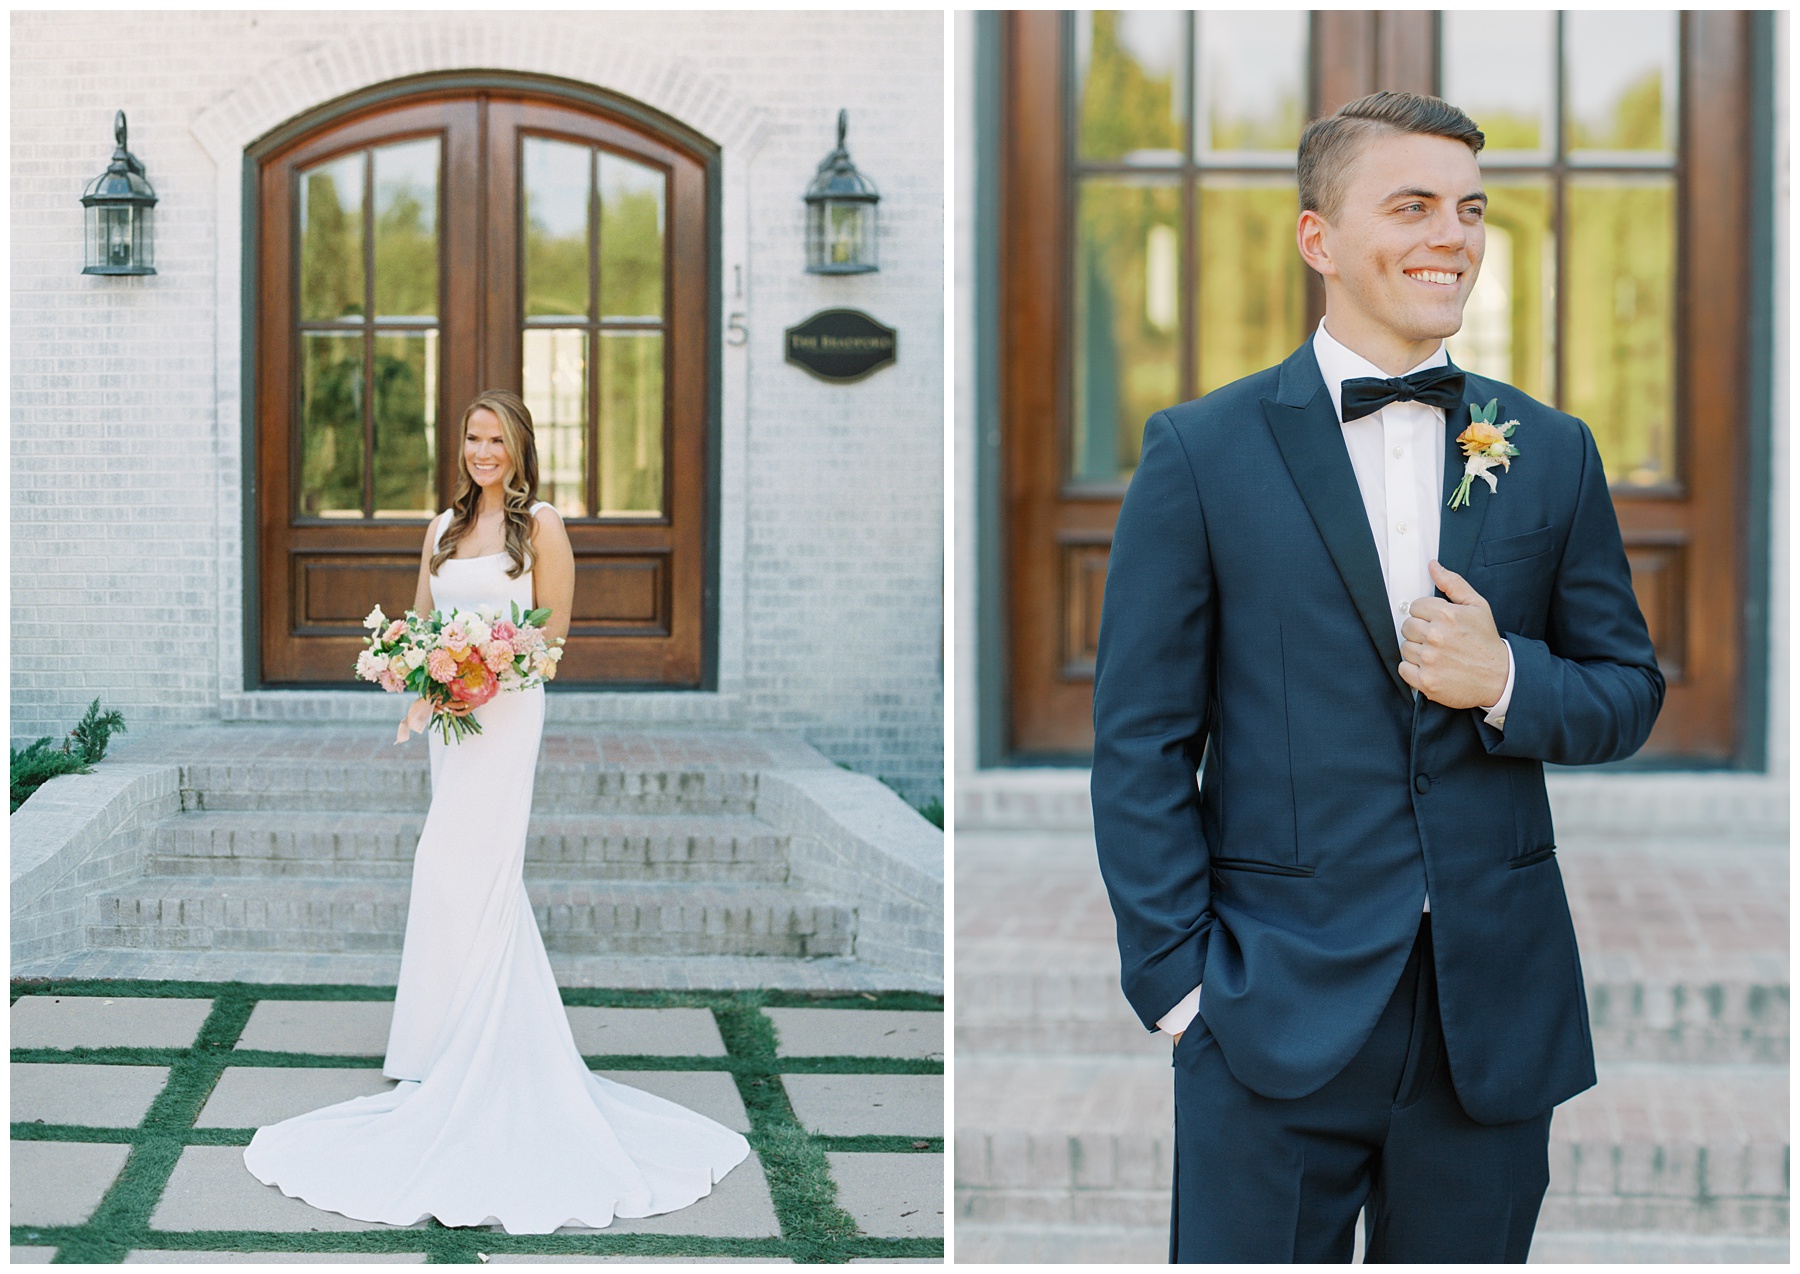 bride stands on patio holding summer bouquet of coral and pink flowers while groom looks to side holding lapel of navy suit